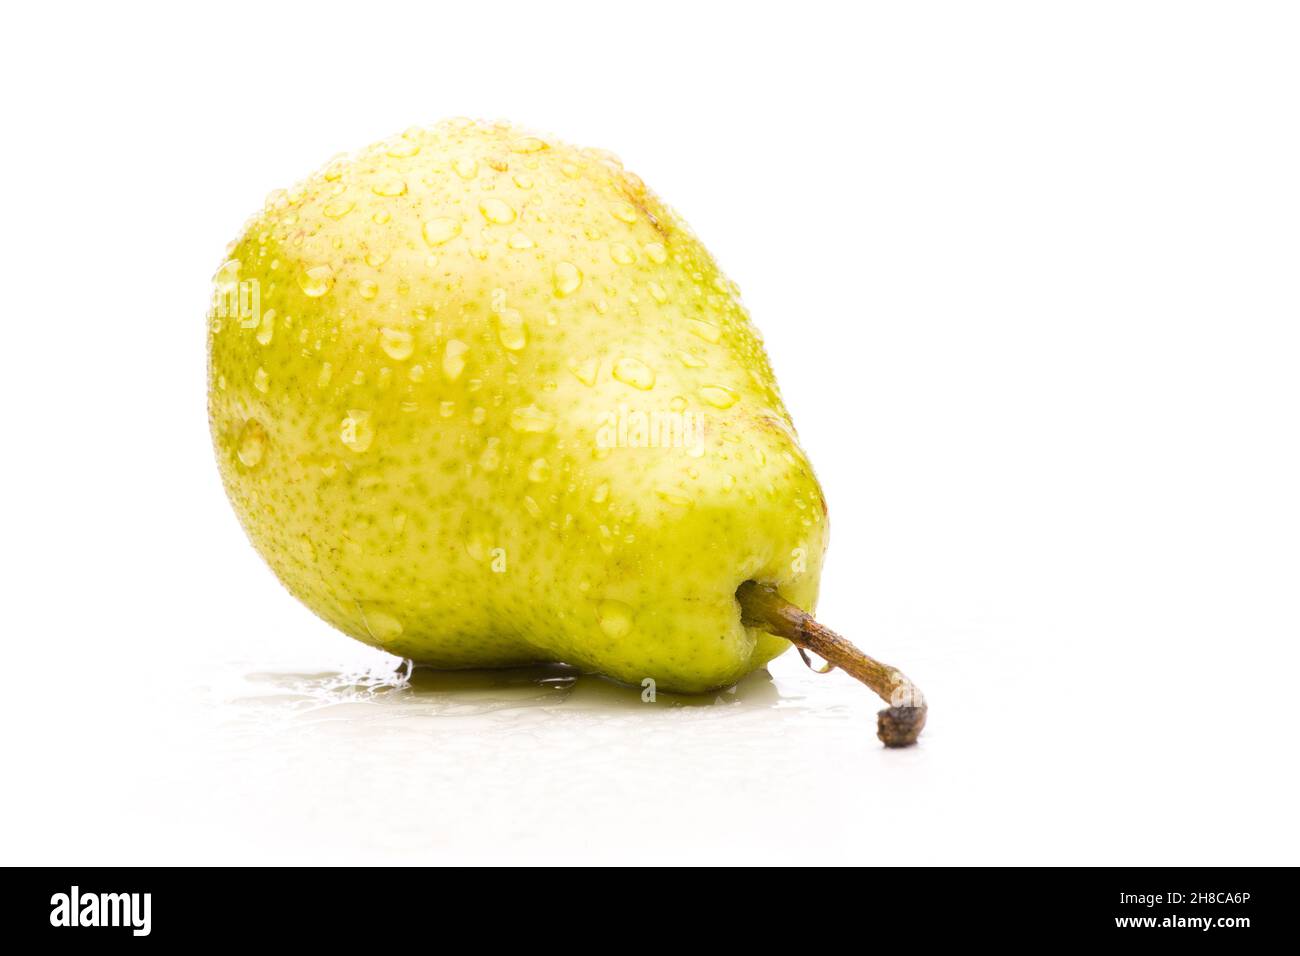 A pear isolated on white background Stock Photo